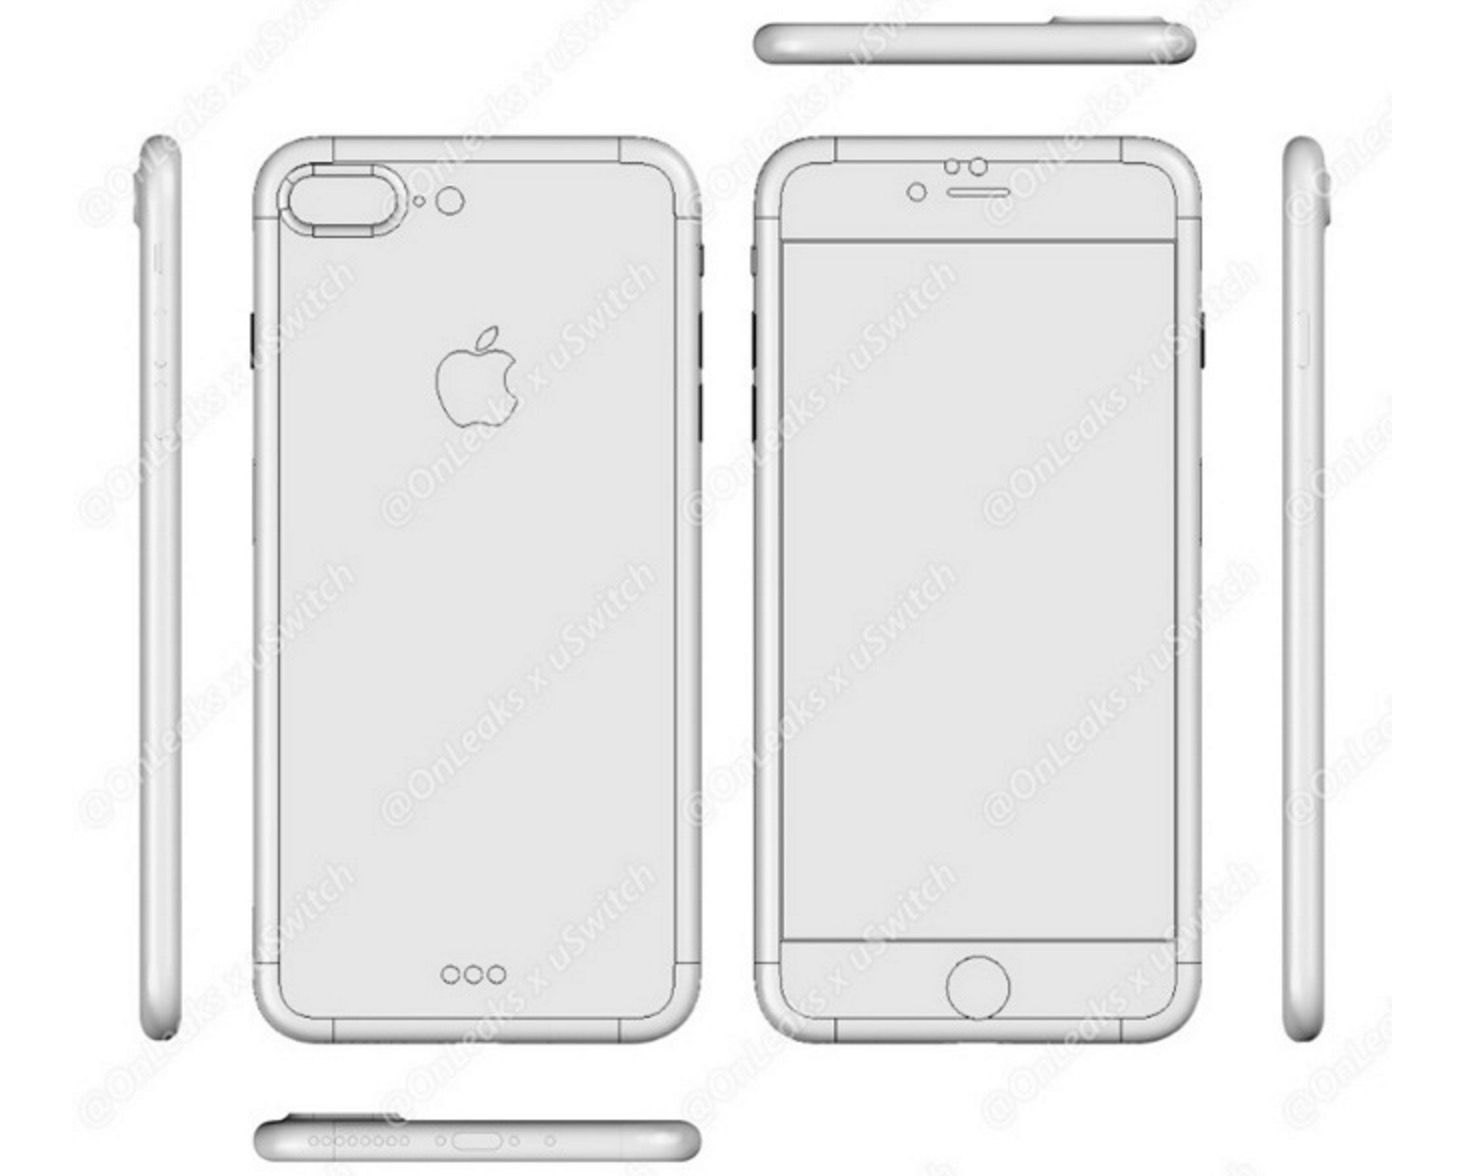 apple iphone 7 plus could exclusively pack dual camera smart connector image 2